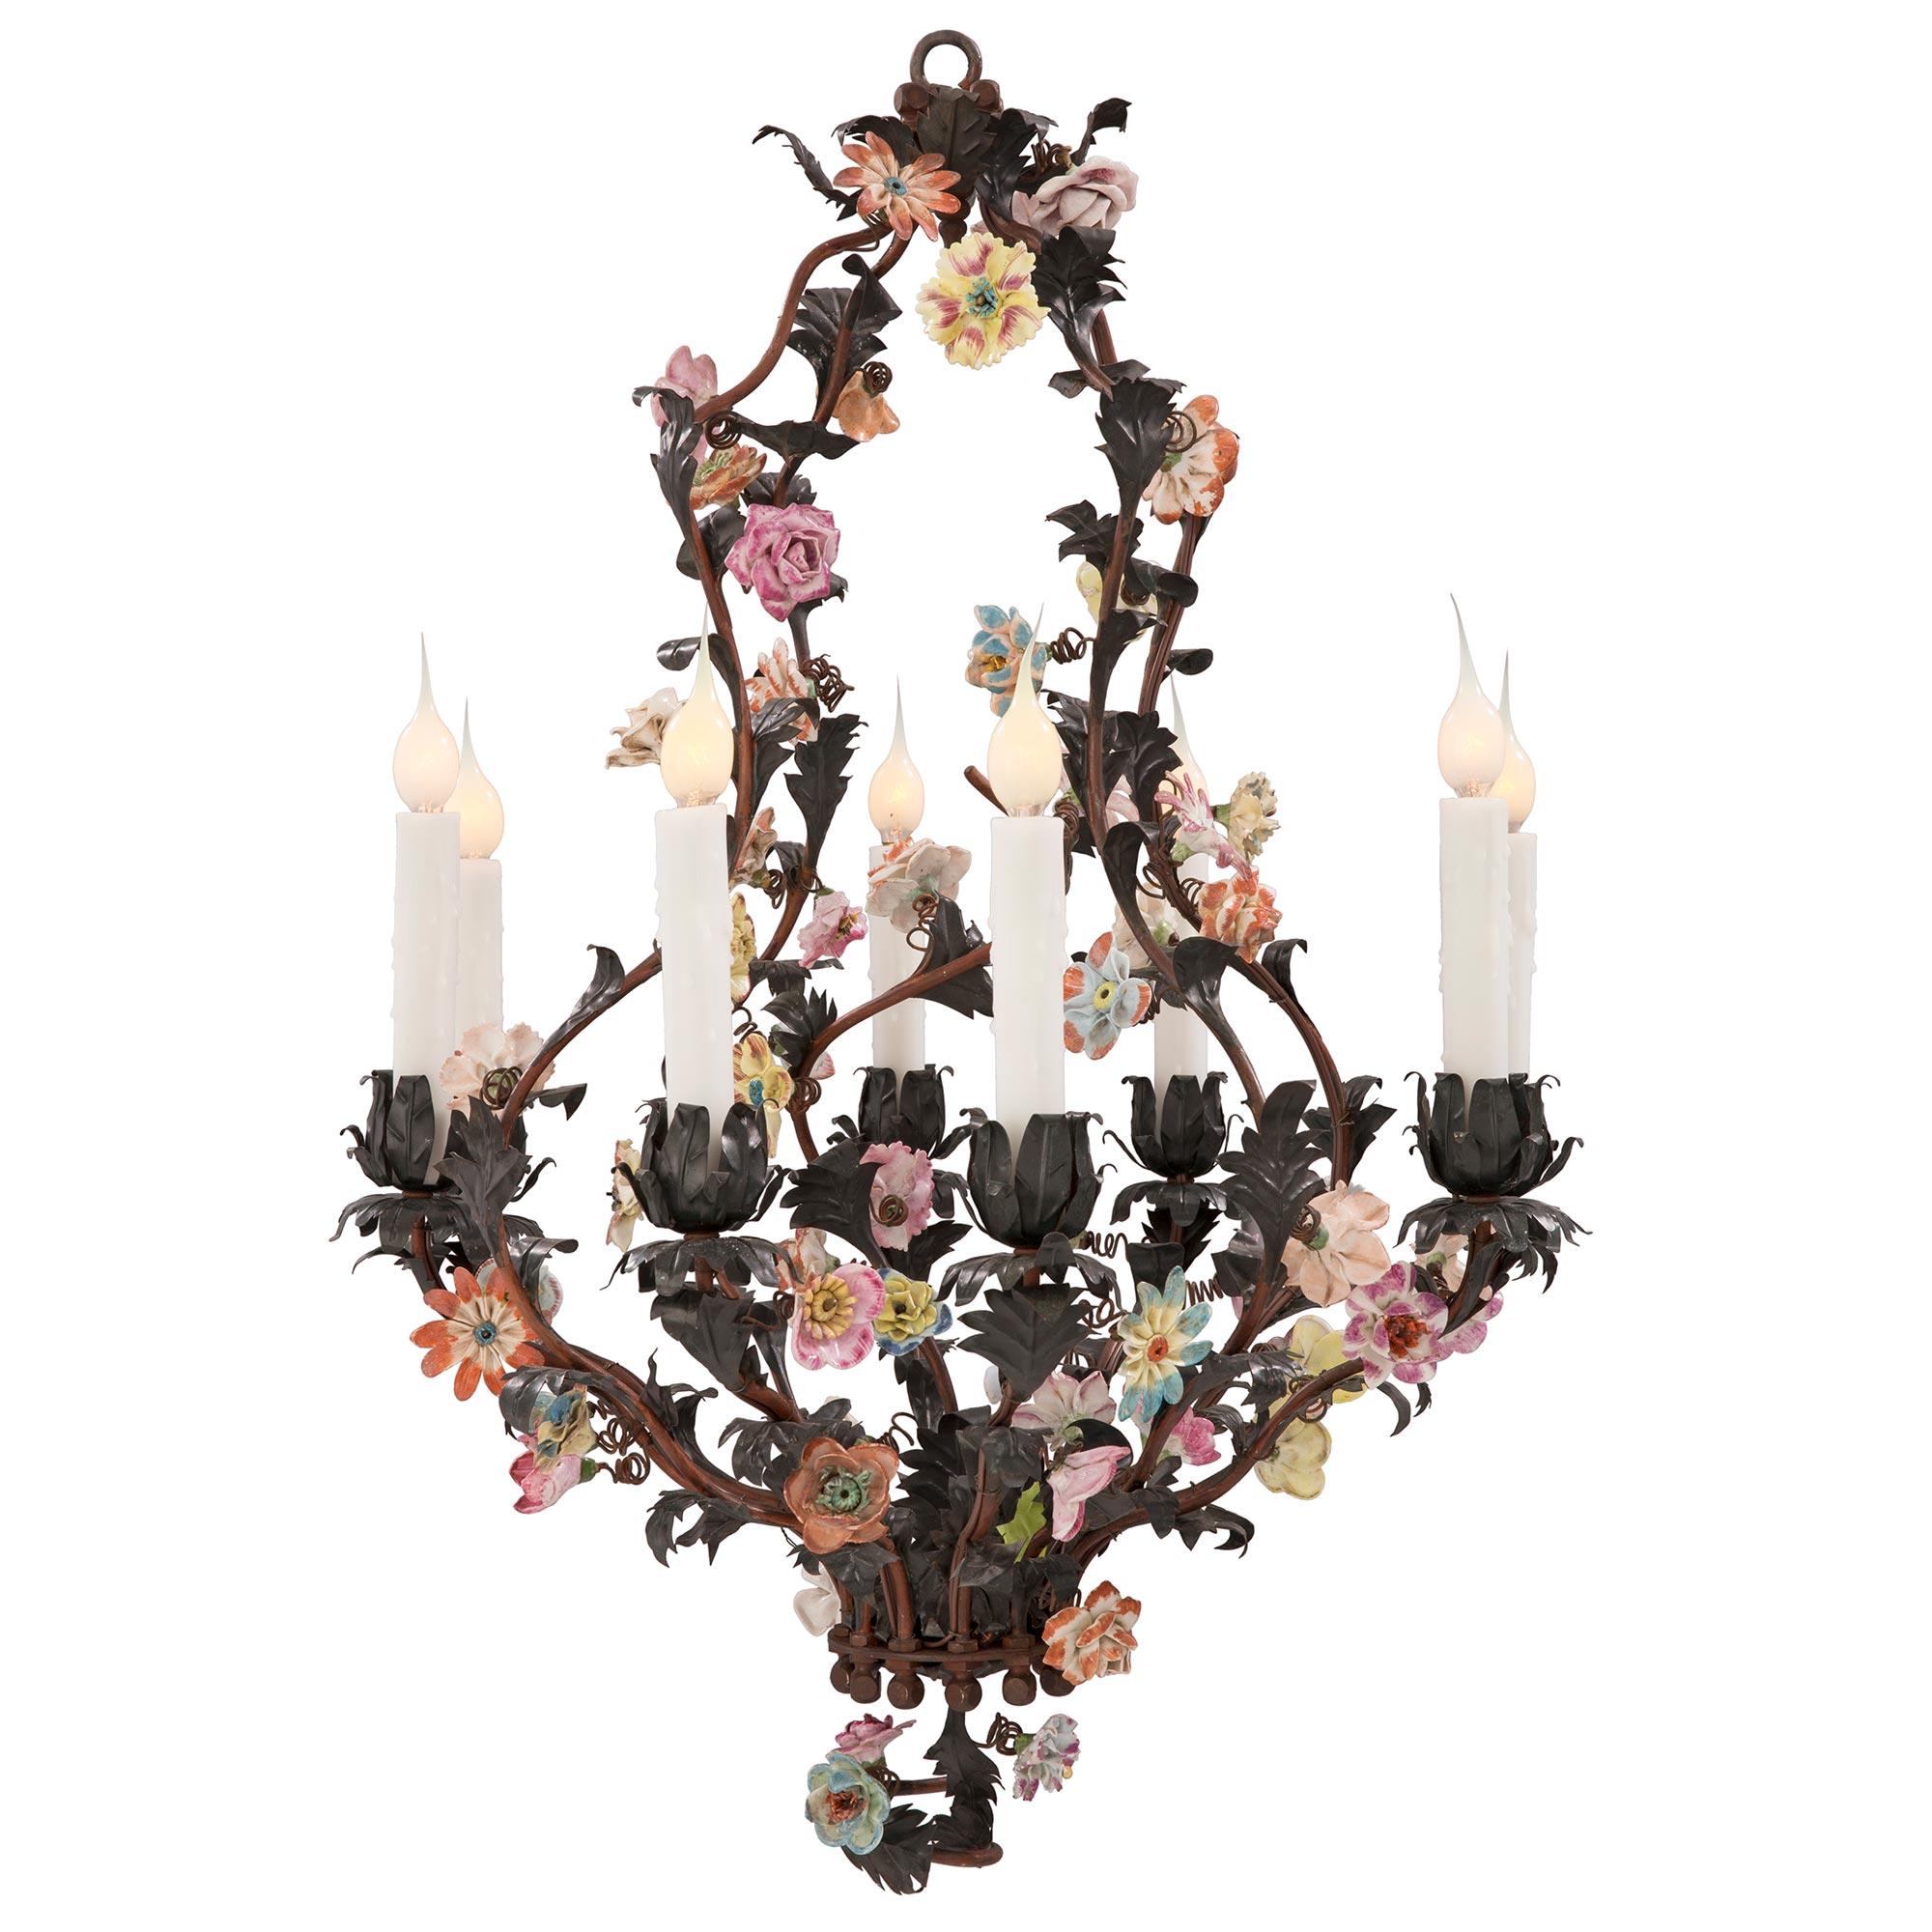 A lovely and most charming French 19th century Saxe porcelain, tole and patinated bronze chandelier. The eight light chandelier is centered by an elegant spiraled design with exquisite Saxe porcelain flowers. The patinated bronze cage displays an